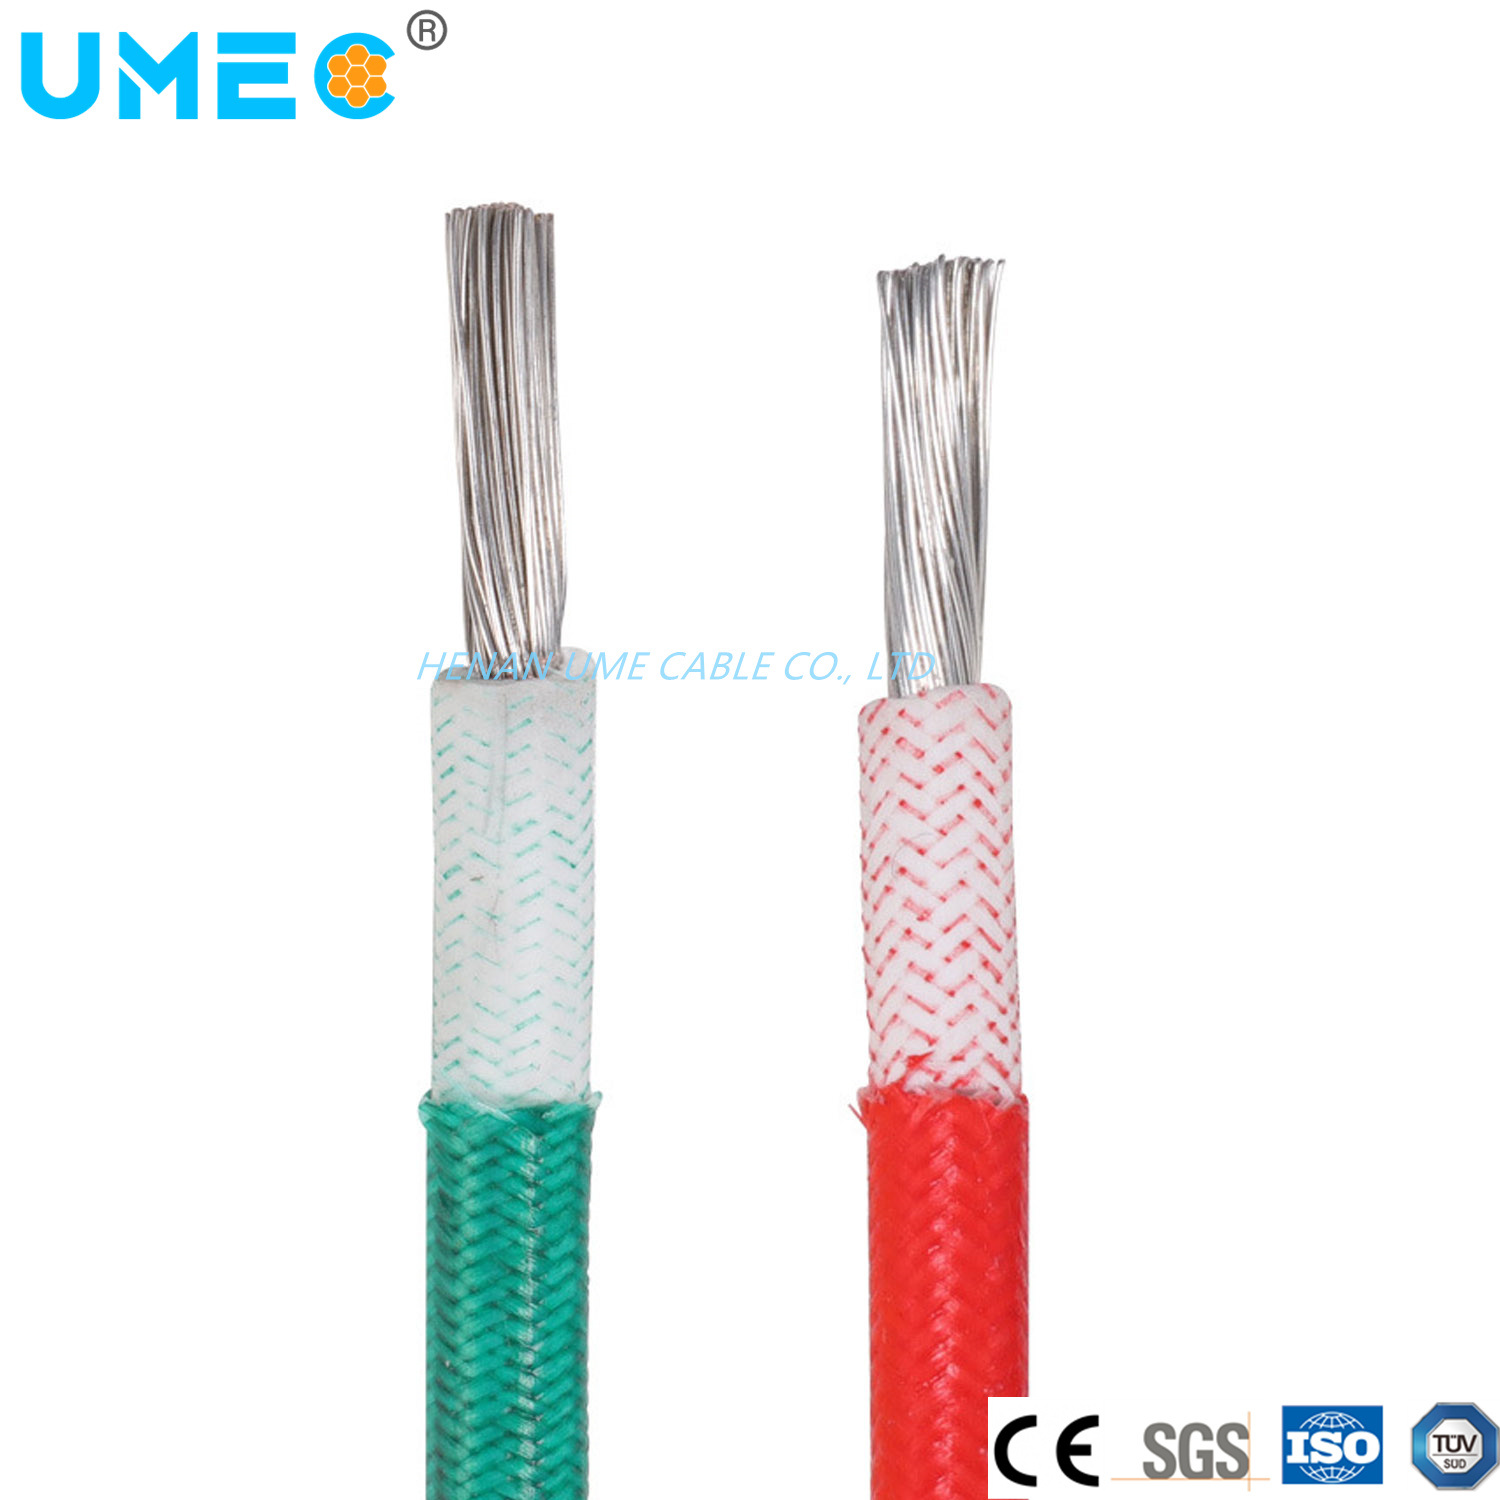 Electrical Silicone Insulation Fiberglass Layer Cable 300/500V 0.5 0.75 1 1.5 2.5 4 6mm2 Sif/Gl Cable Wire